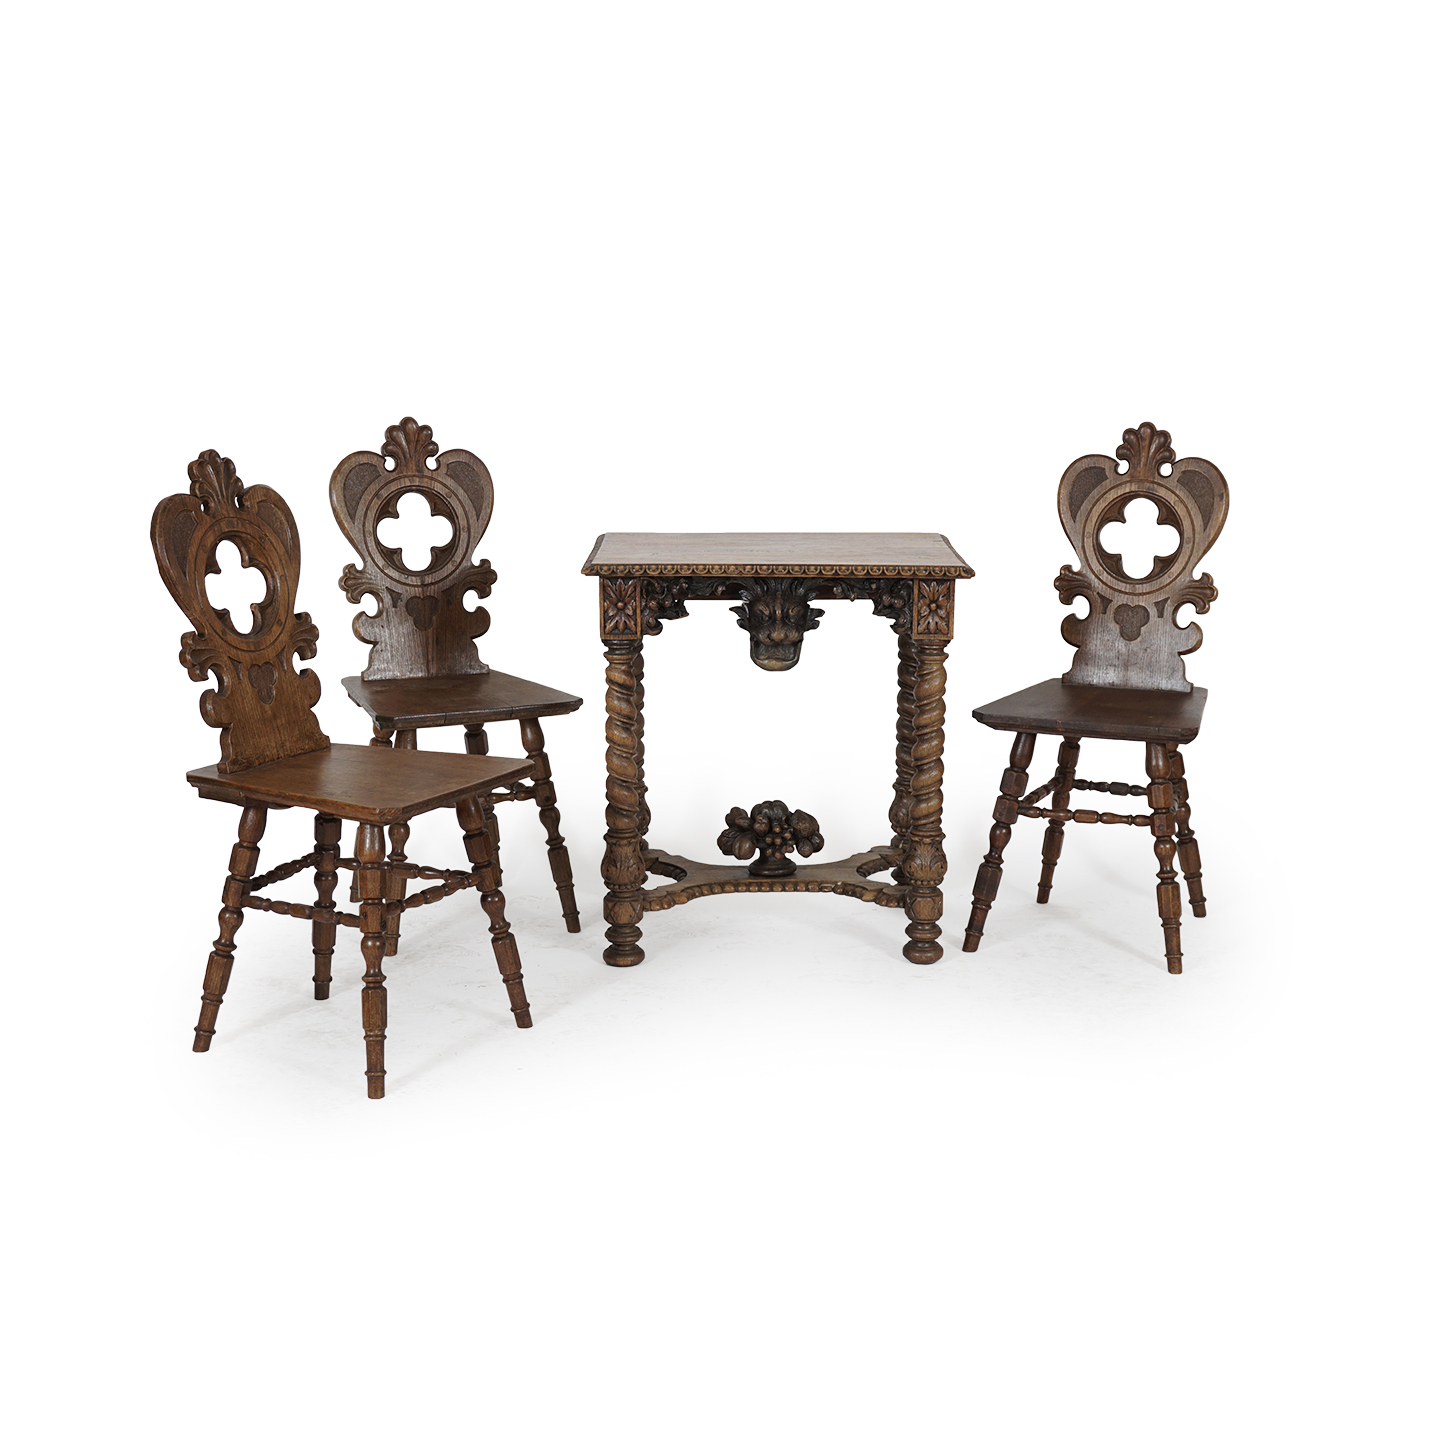 austrian antique table and chairs in historism